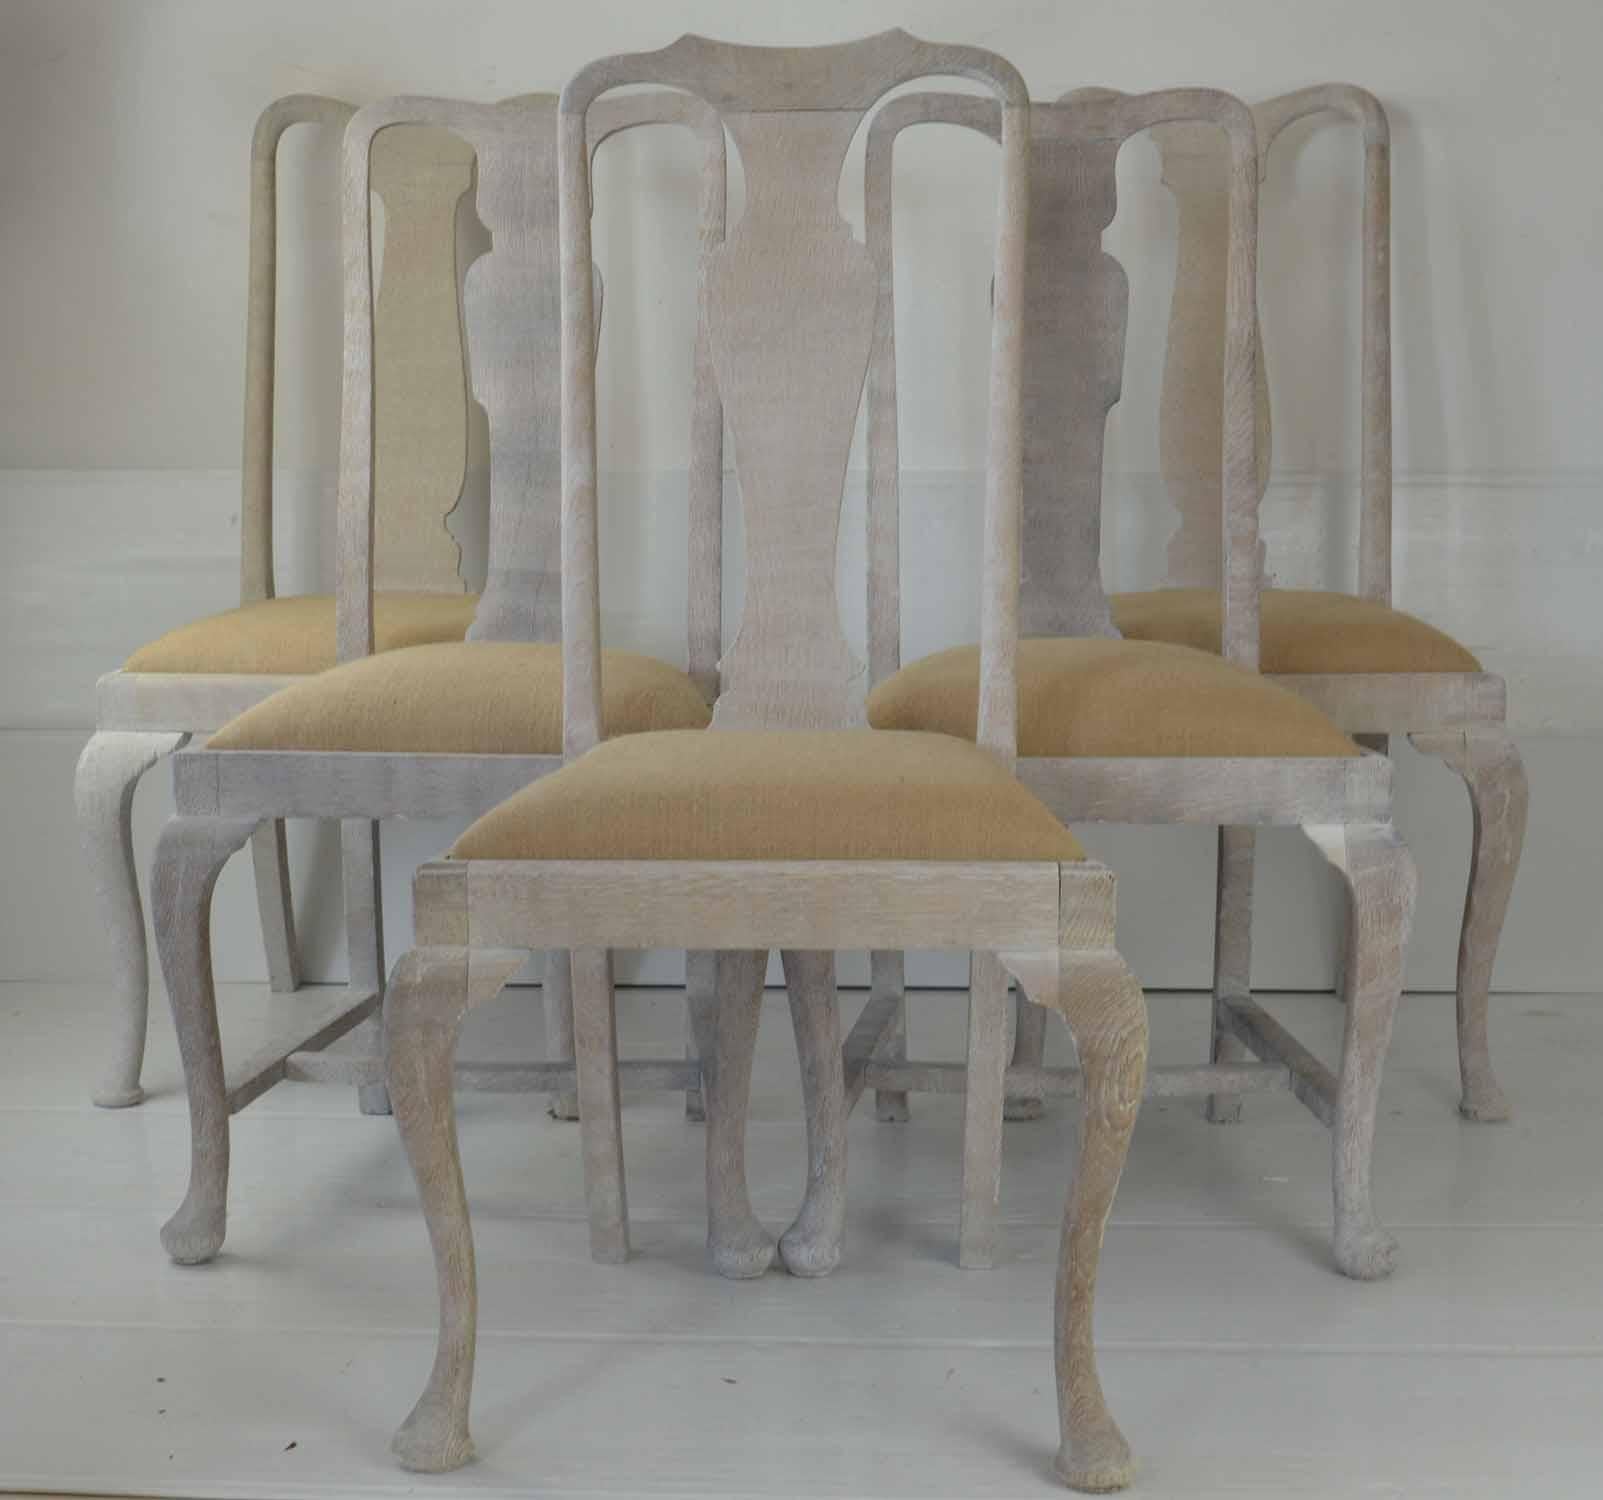 A set of ten English limed oak chairs made up of five different pairs.

I have priced them individually because you might want a set of six or eight. I can also extend the set to 12 or 14 because I have similar chairs in stock.

Each pair has a